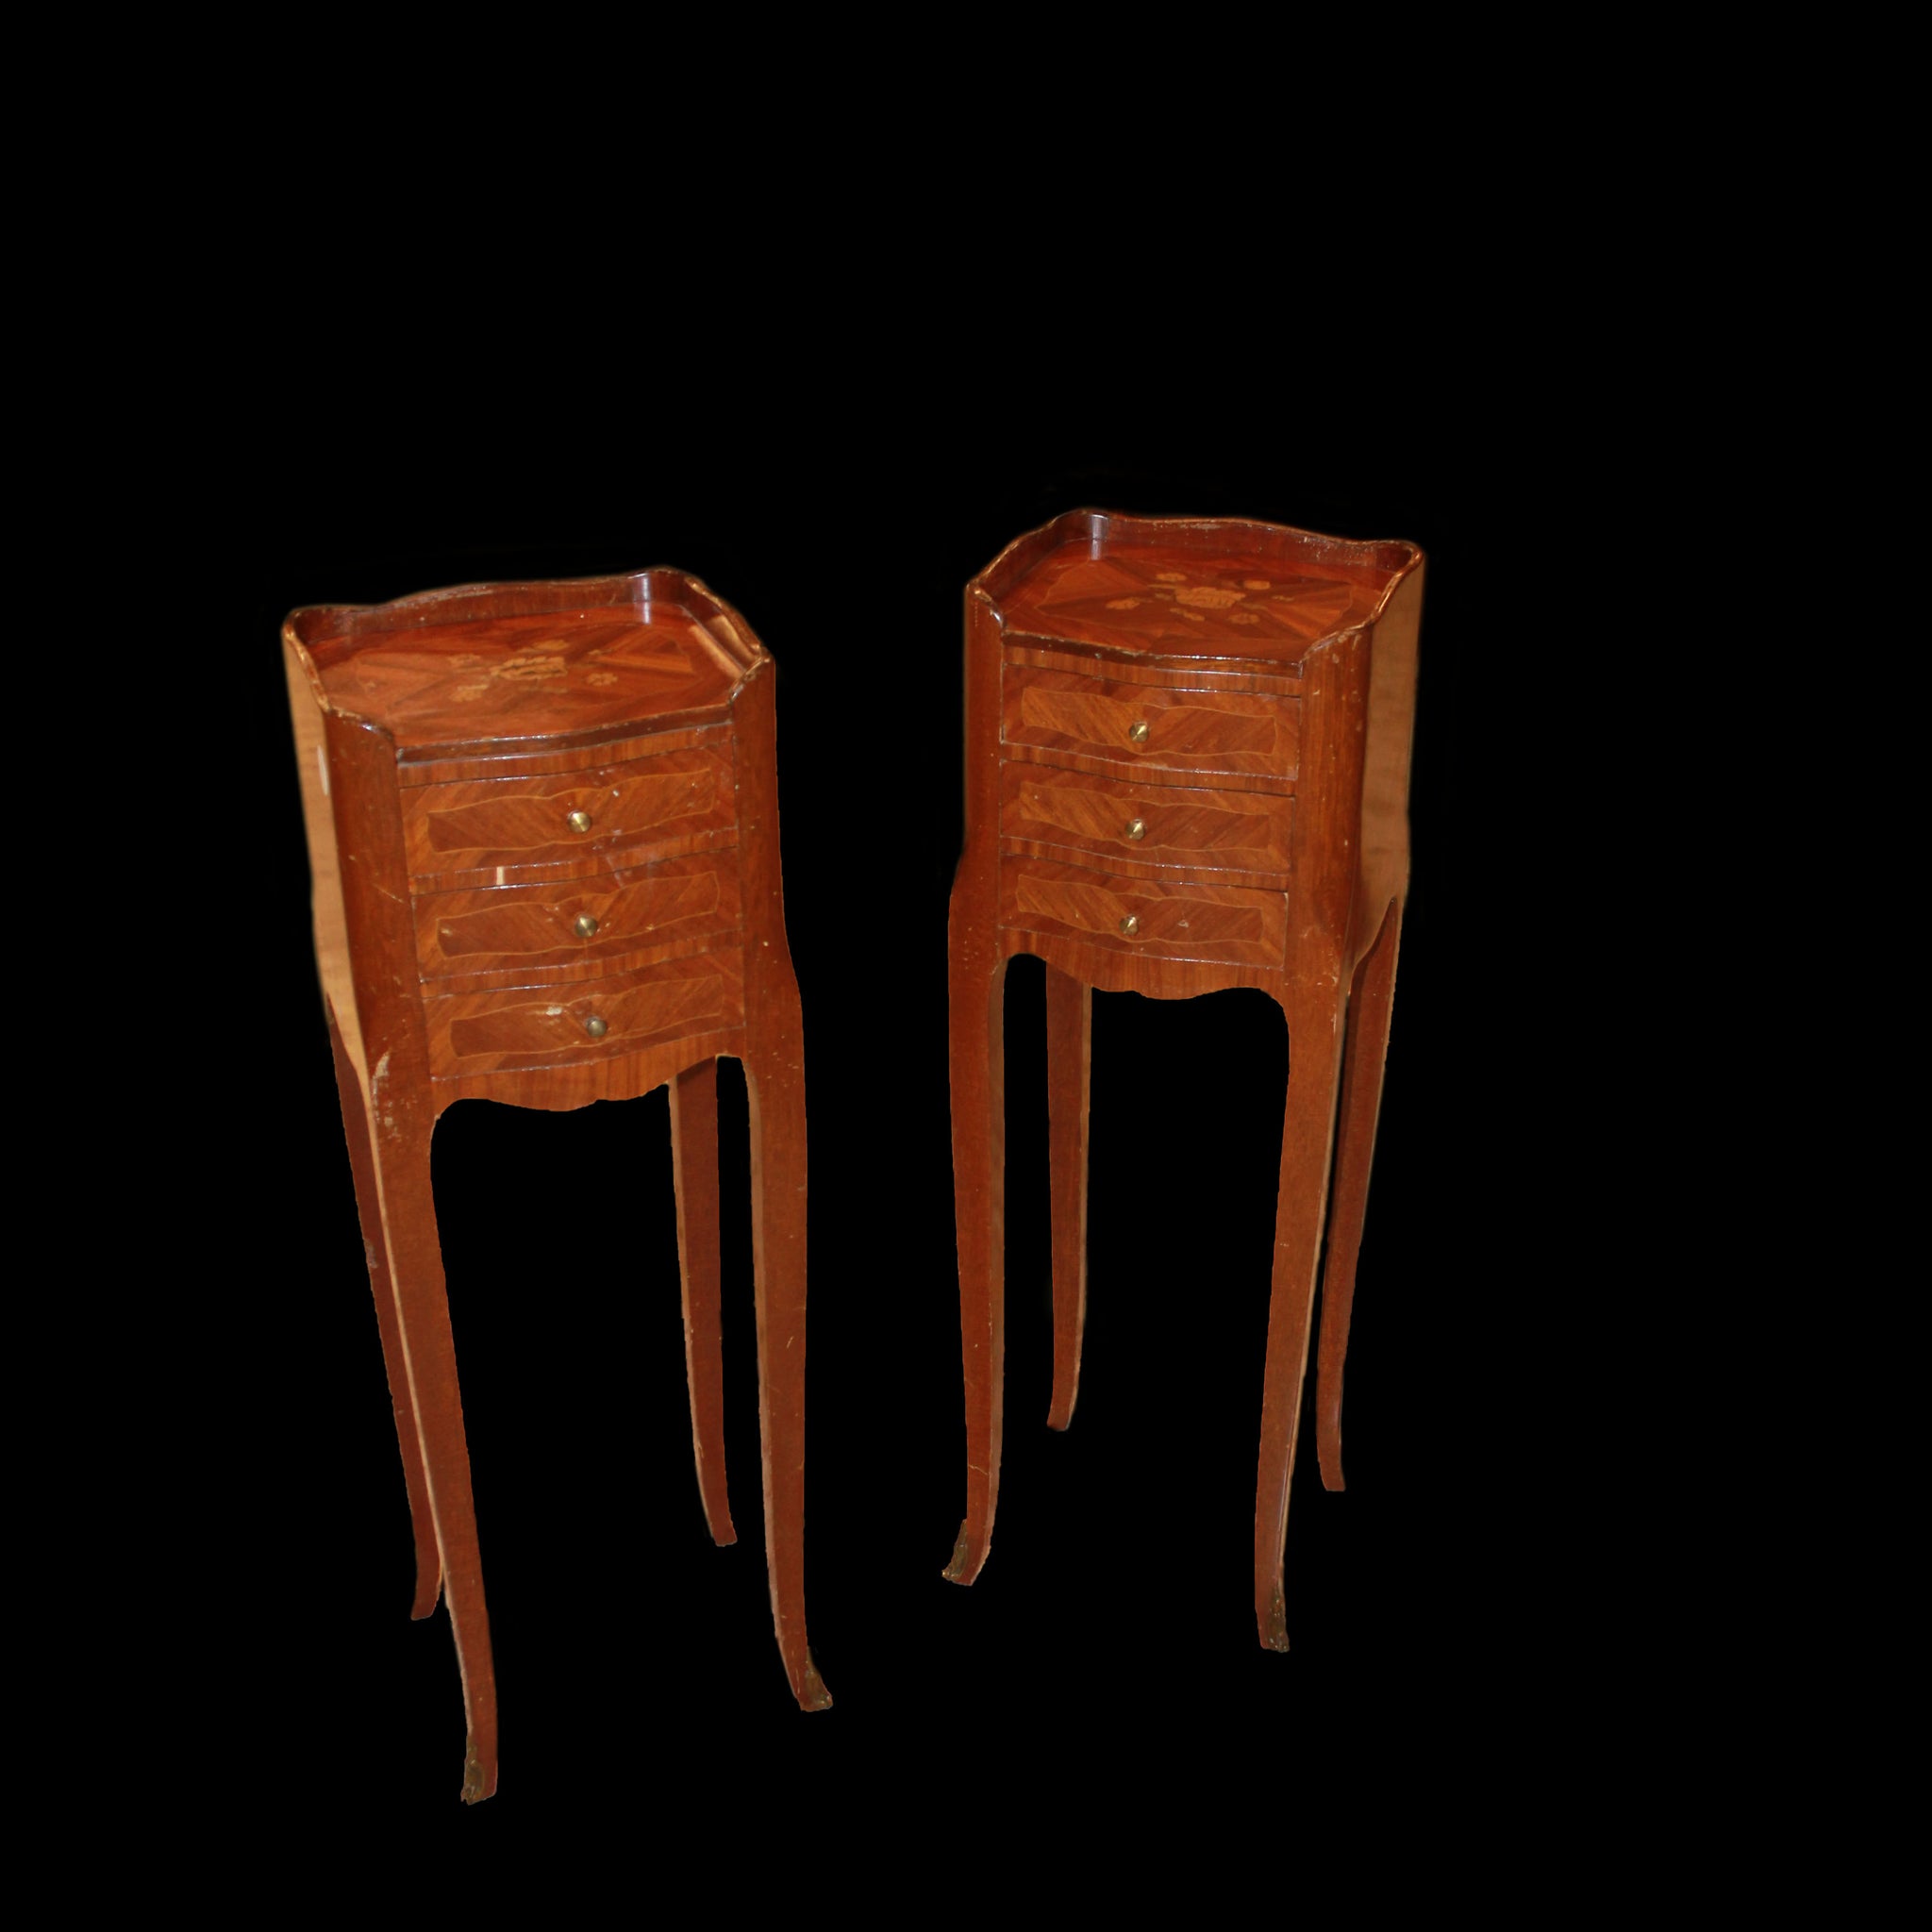 Pair of Louis XV style bedside cabinets in richly inlaid bois de rose wood